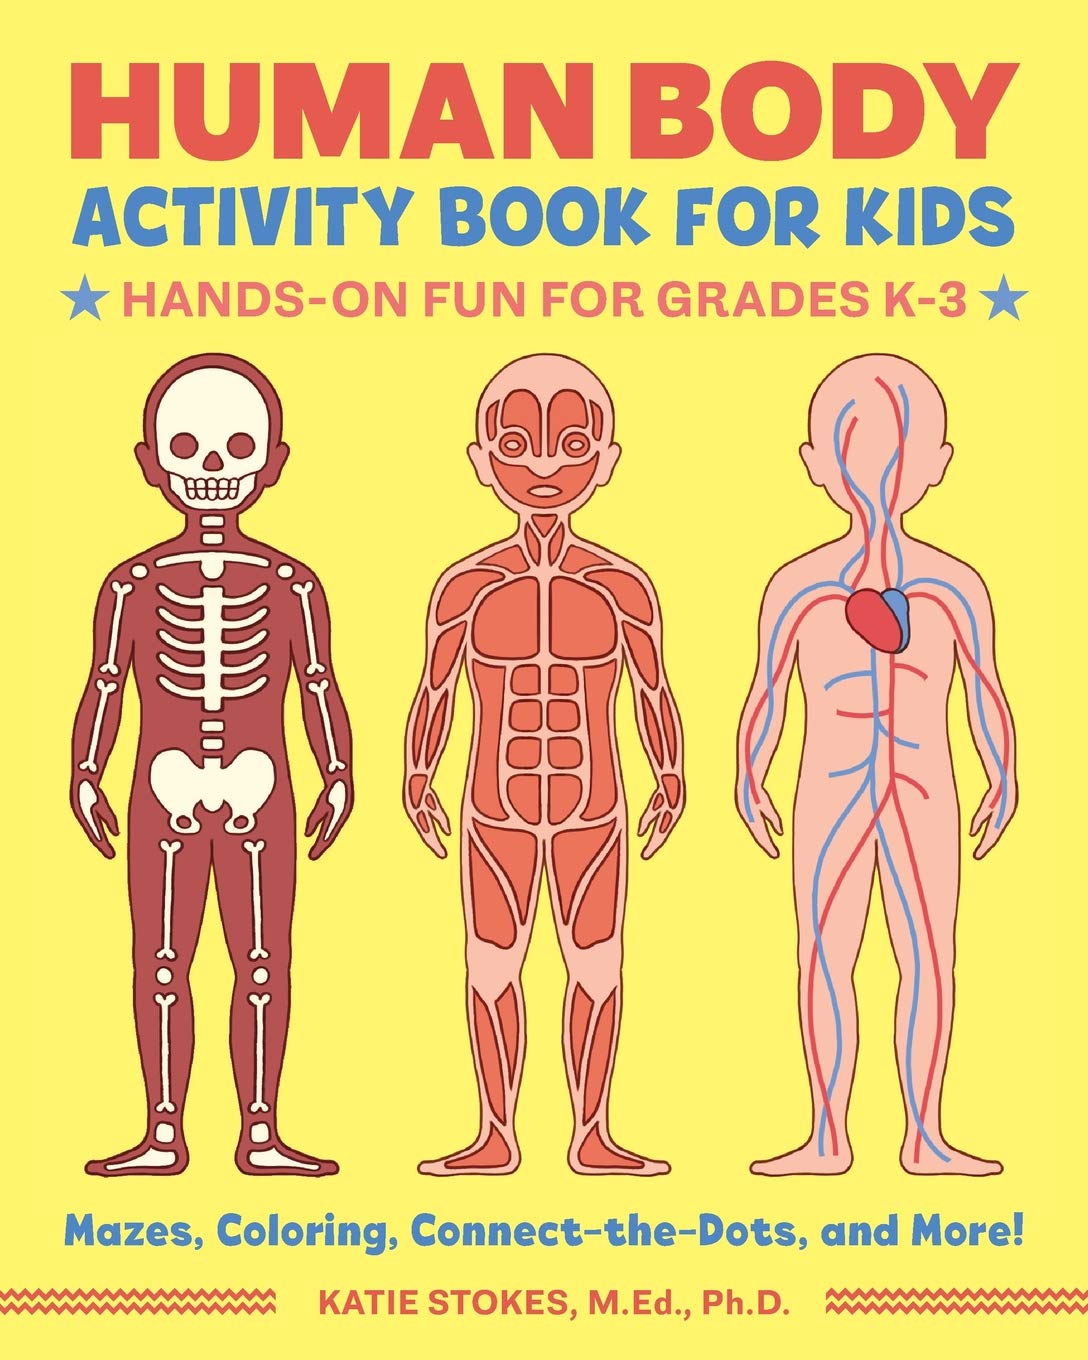 Human Body Activity Book for Kids Only 4.59! a